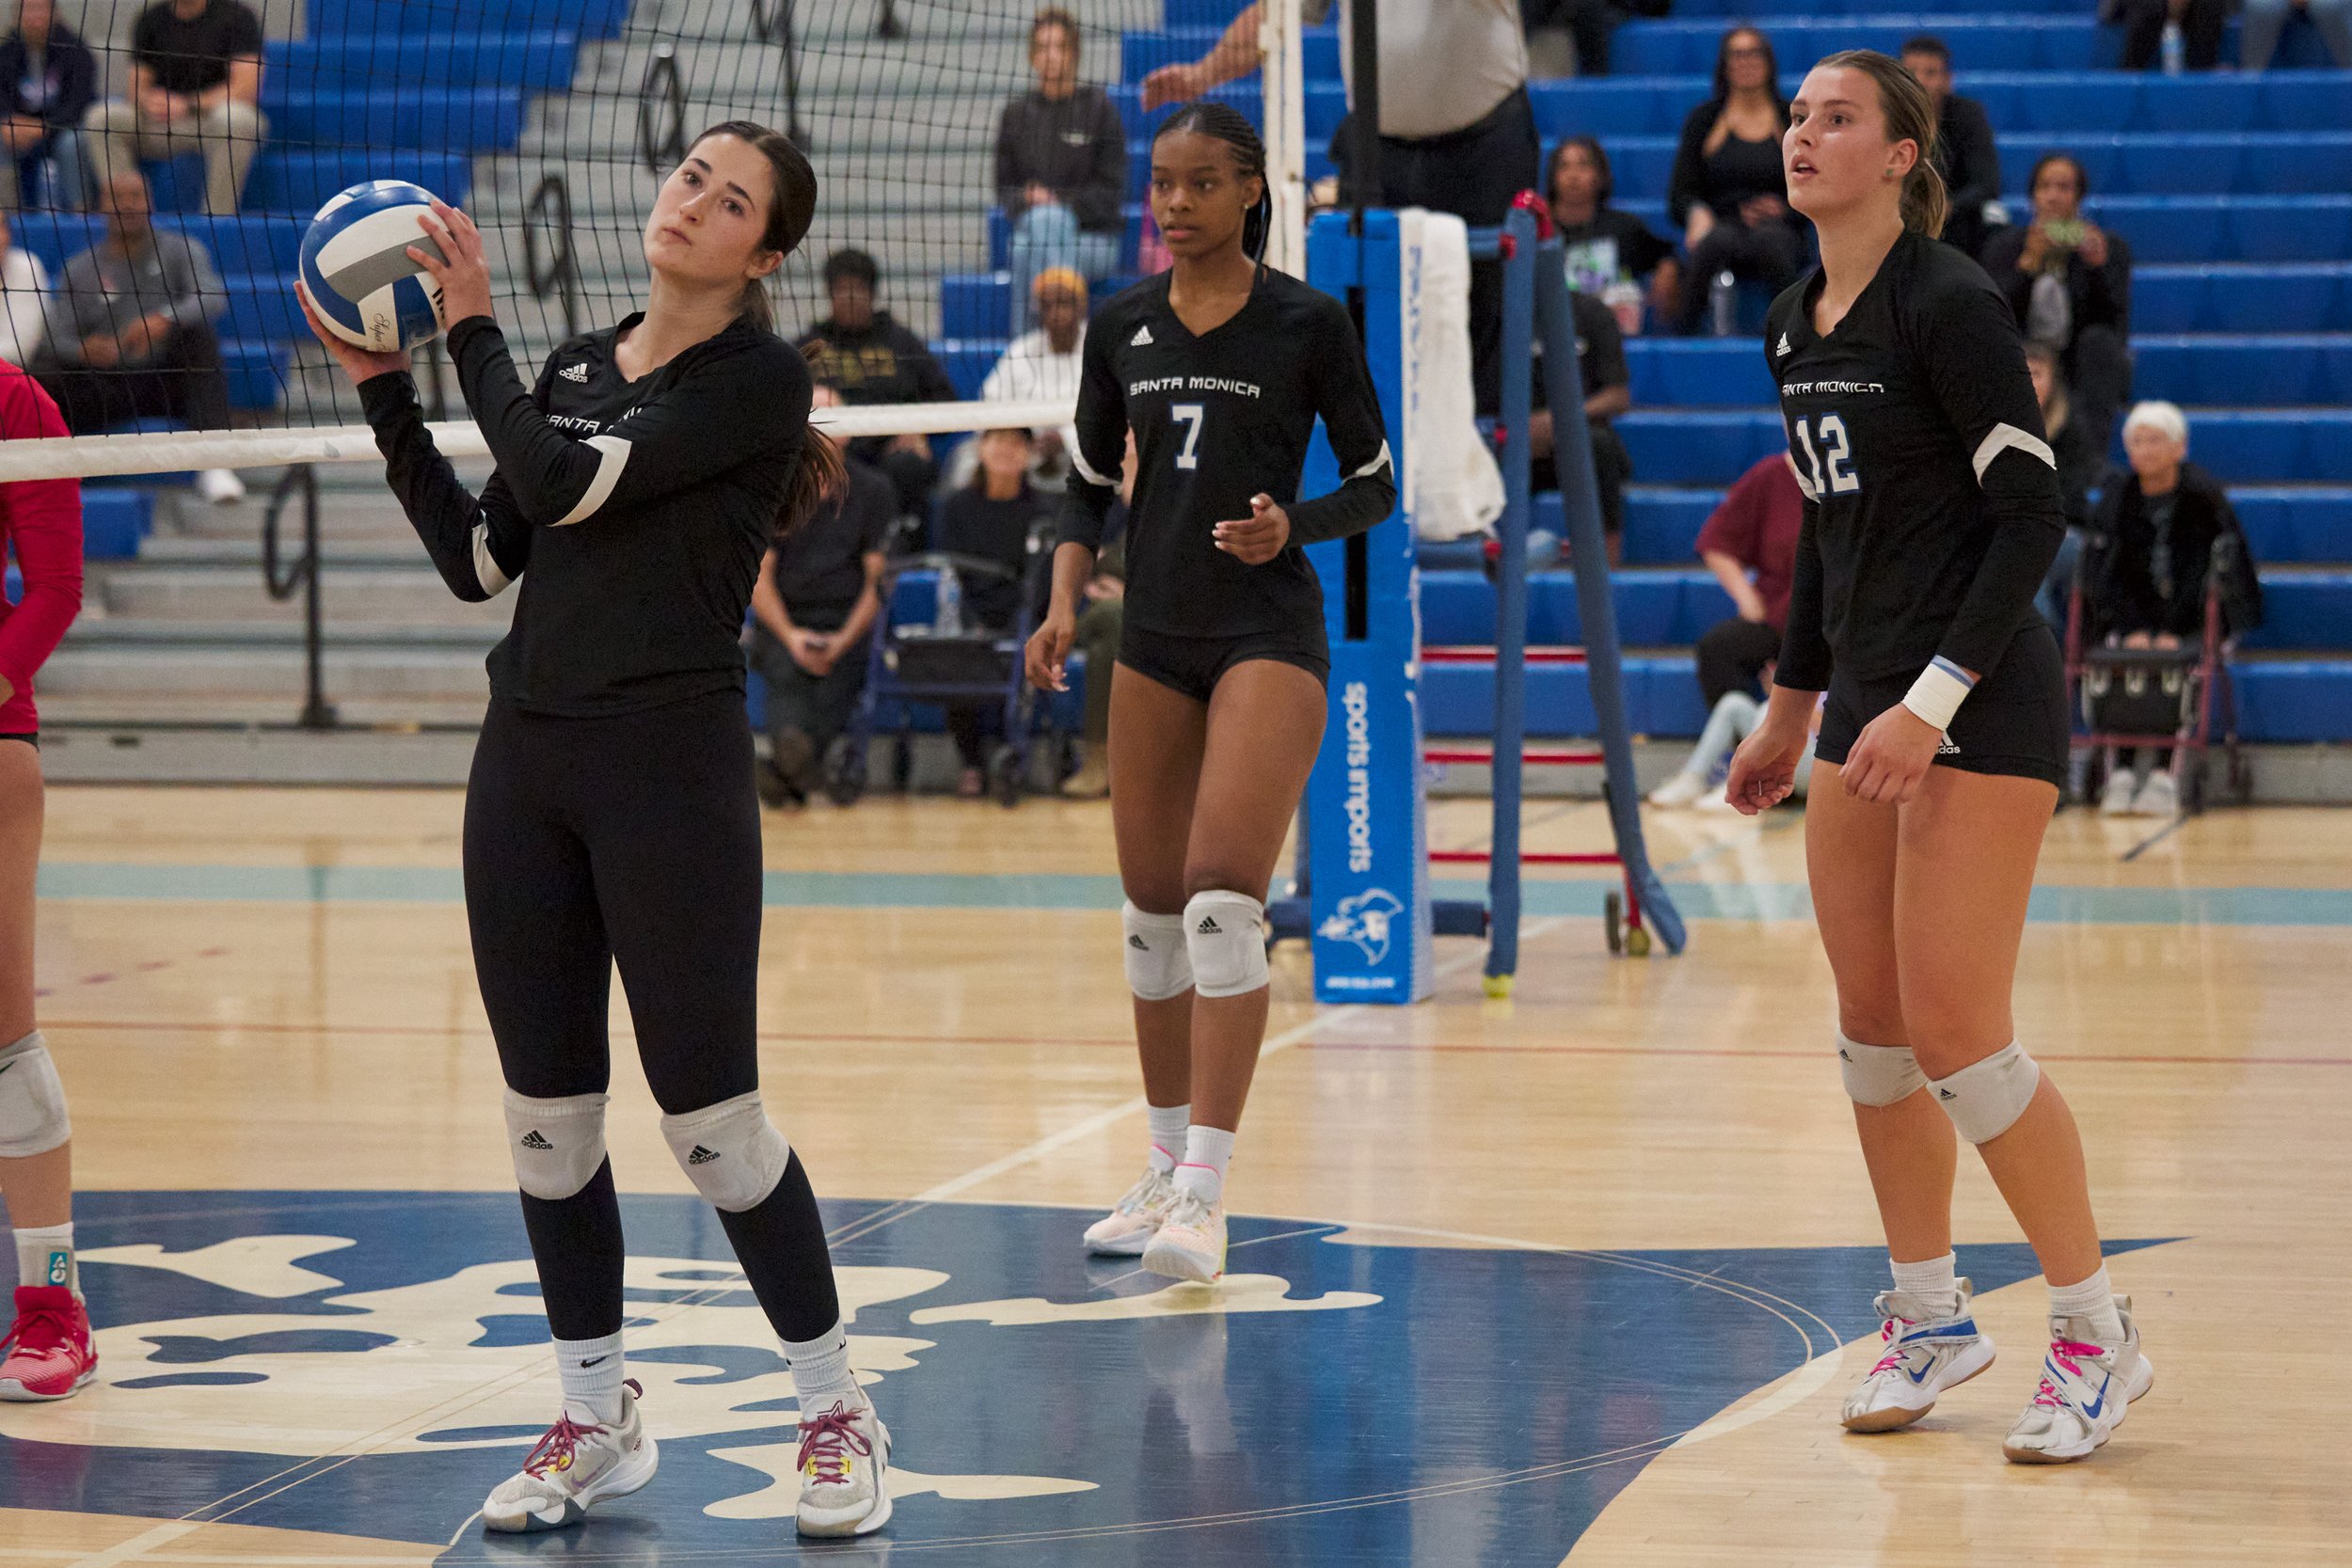  Santa Monica College Corsairs' Maiella Riva, next to Zarha Stanton and Mia Paulson, takes the ball after the Bakersfield College Renegades scored a point during the women's volleyball match on Wednesday, Nov. 1, 2023, at Corsair Gym in Santa Monica,